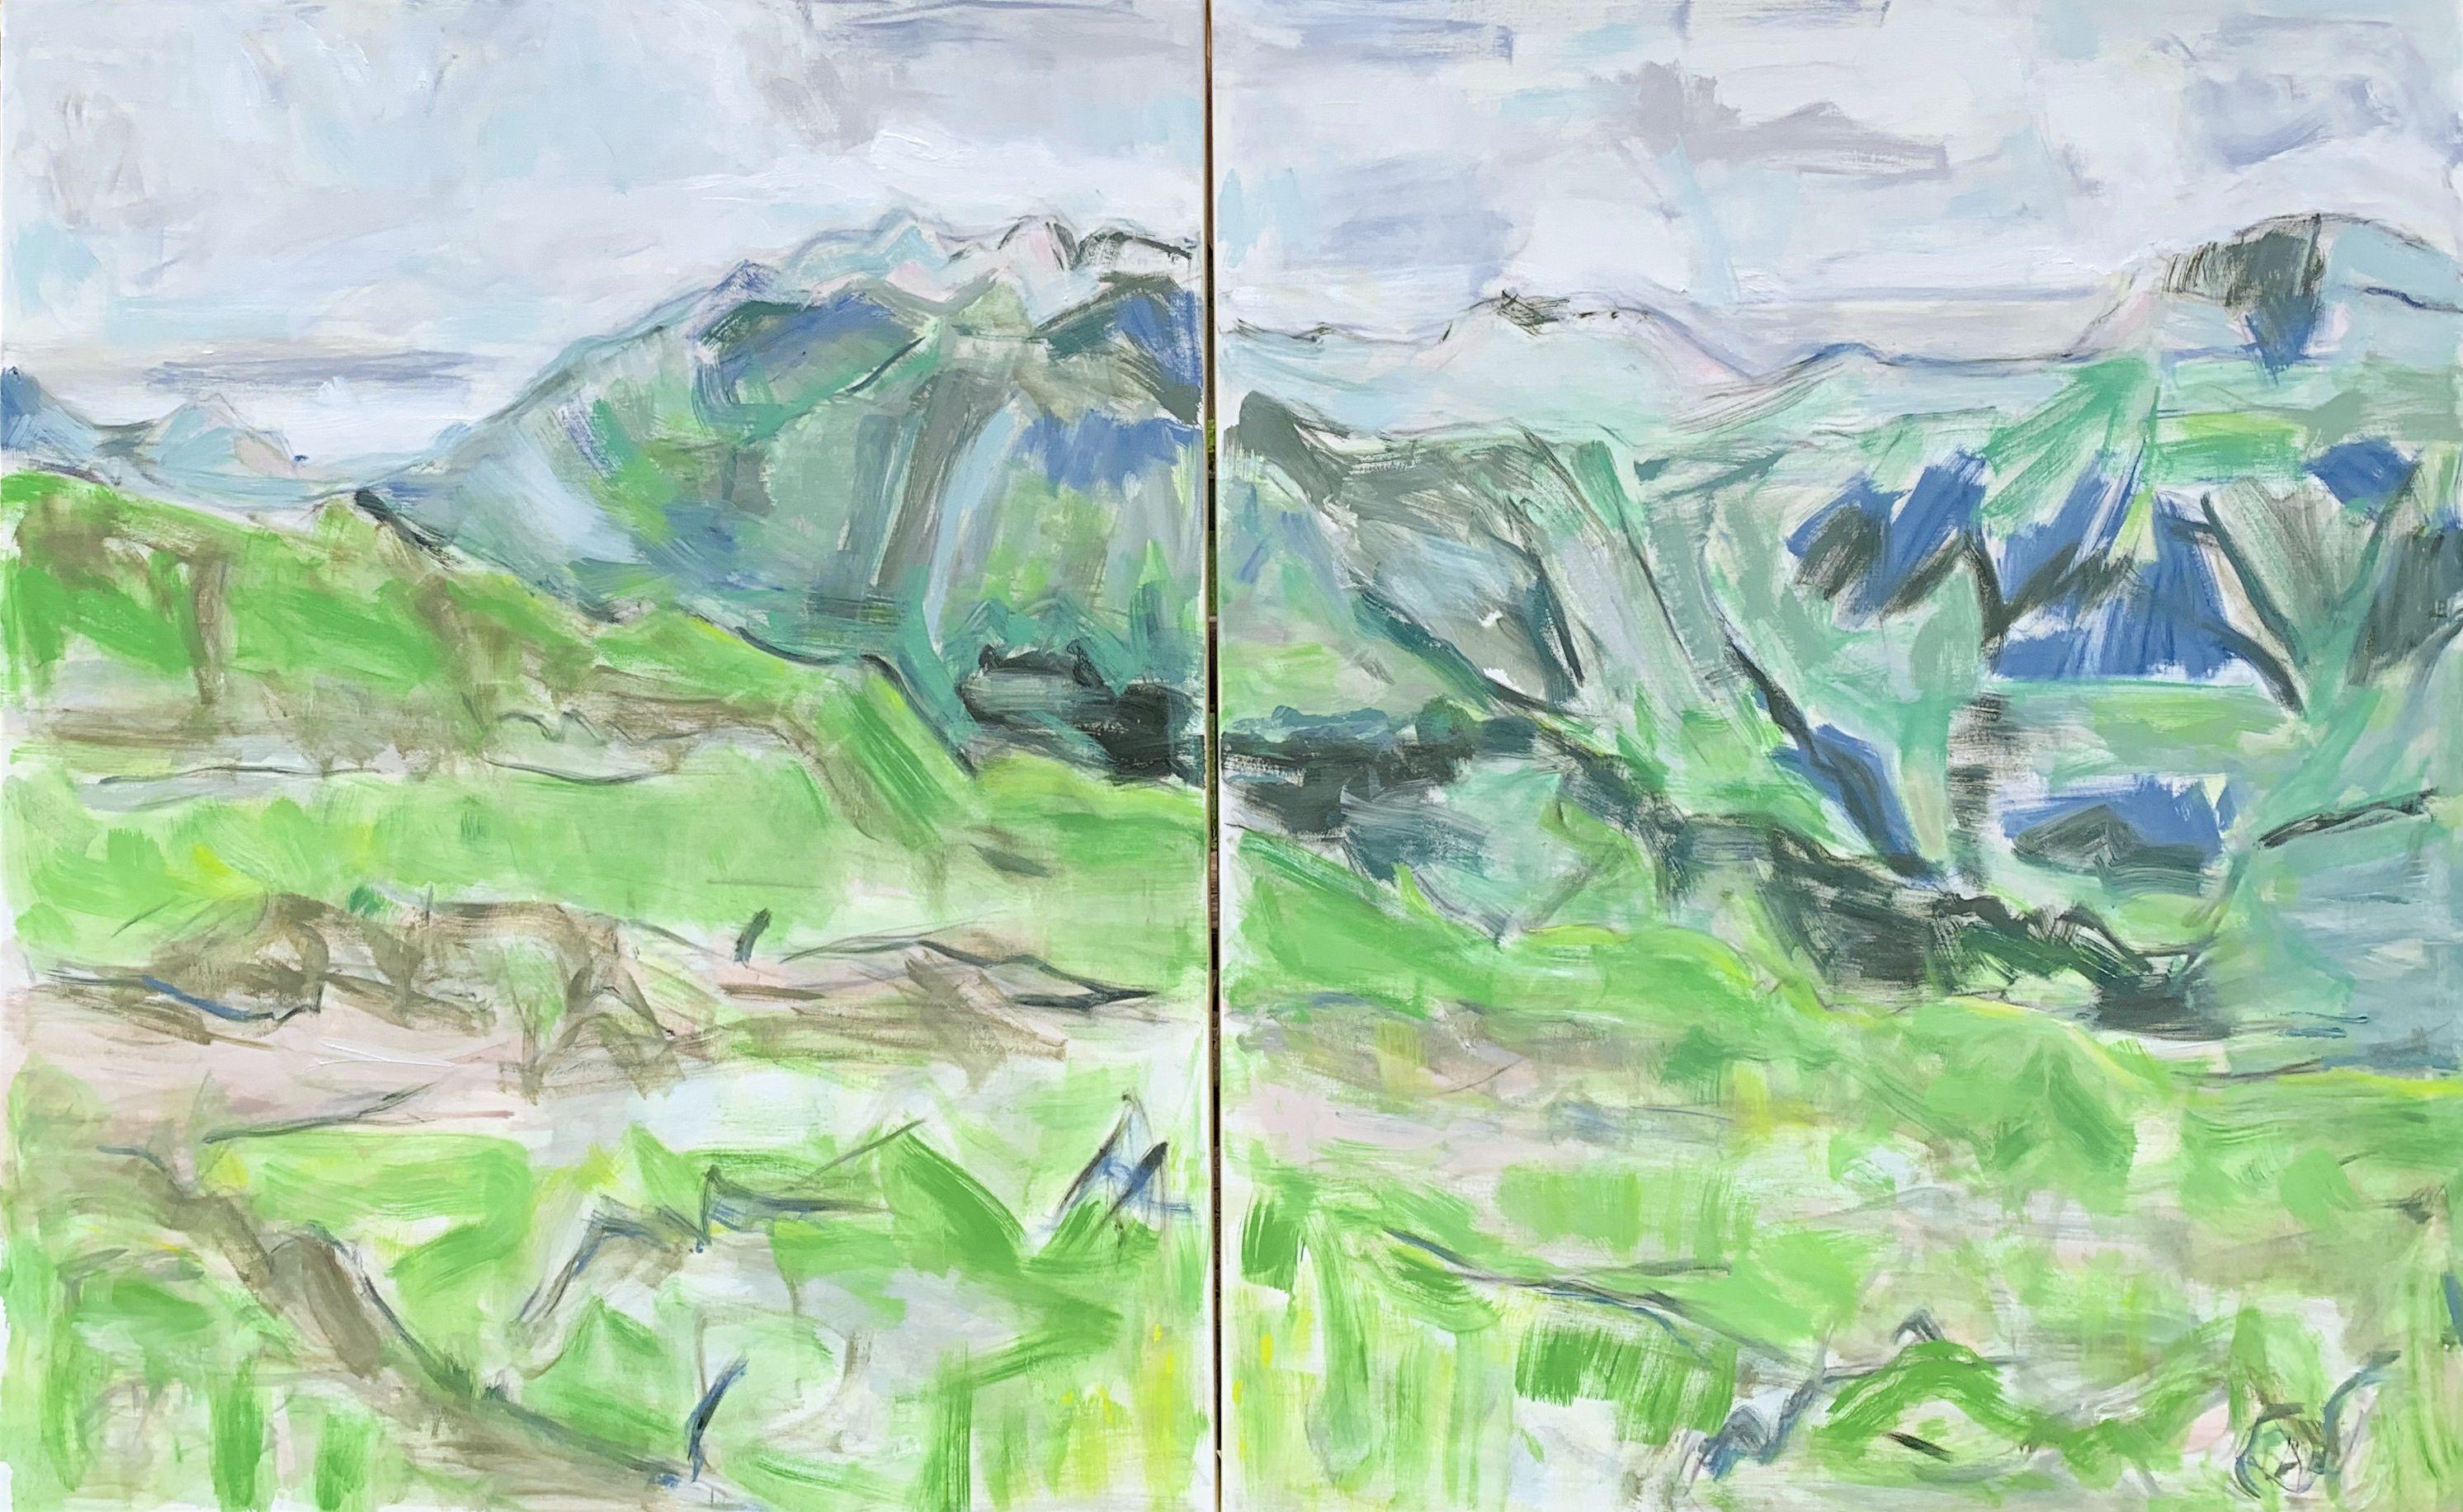 "Rocky Mountain Pass" is a free-spirited lively abstract landscape diptych oil painting on two large canvases by Chairish's award winning artist and trusted seller, Trixie Pitts. It is painted largely with a very soft, palette of light gray, robin's